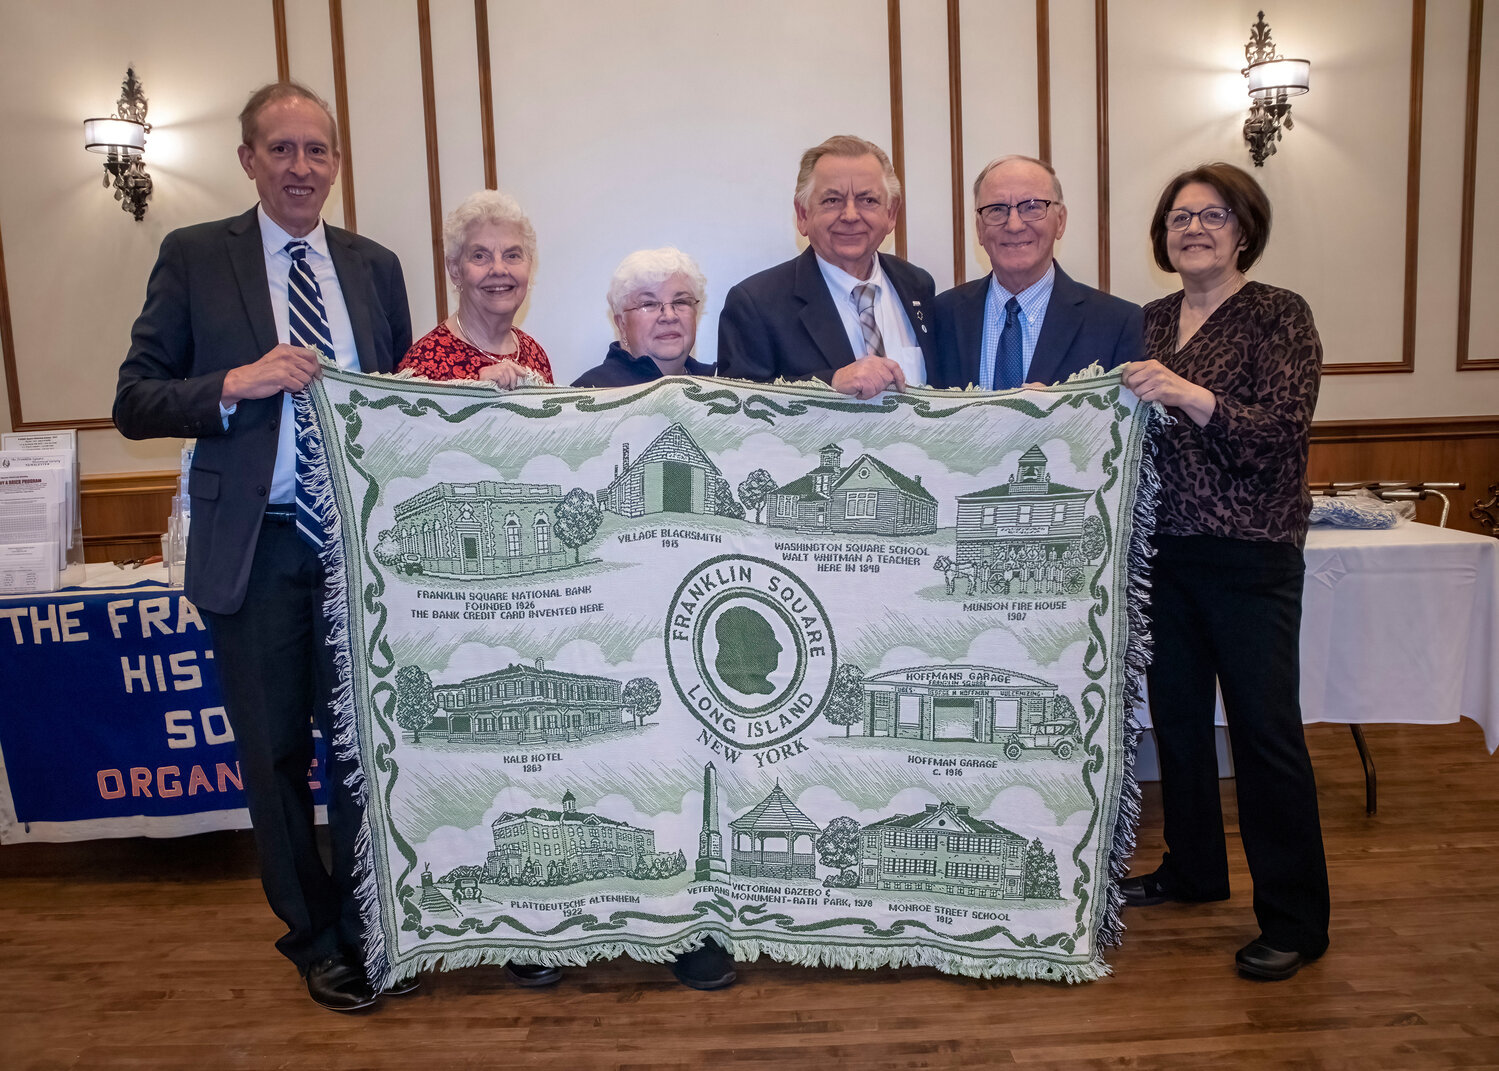 Officers of the Franklin Square Historical Society show off a custom afghan illustrating the community, which is currently available for purchase.